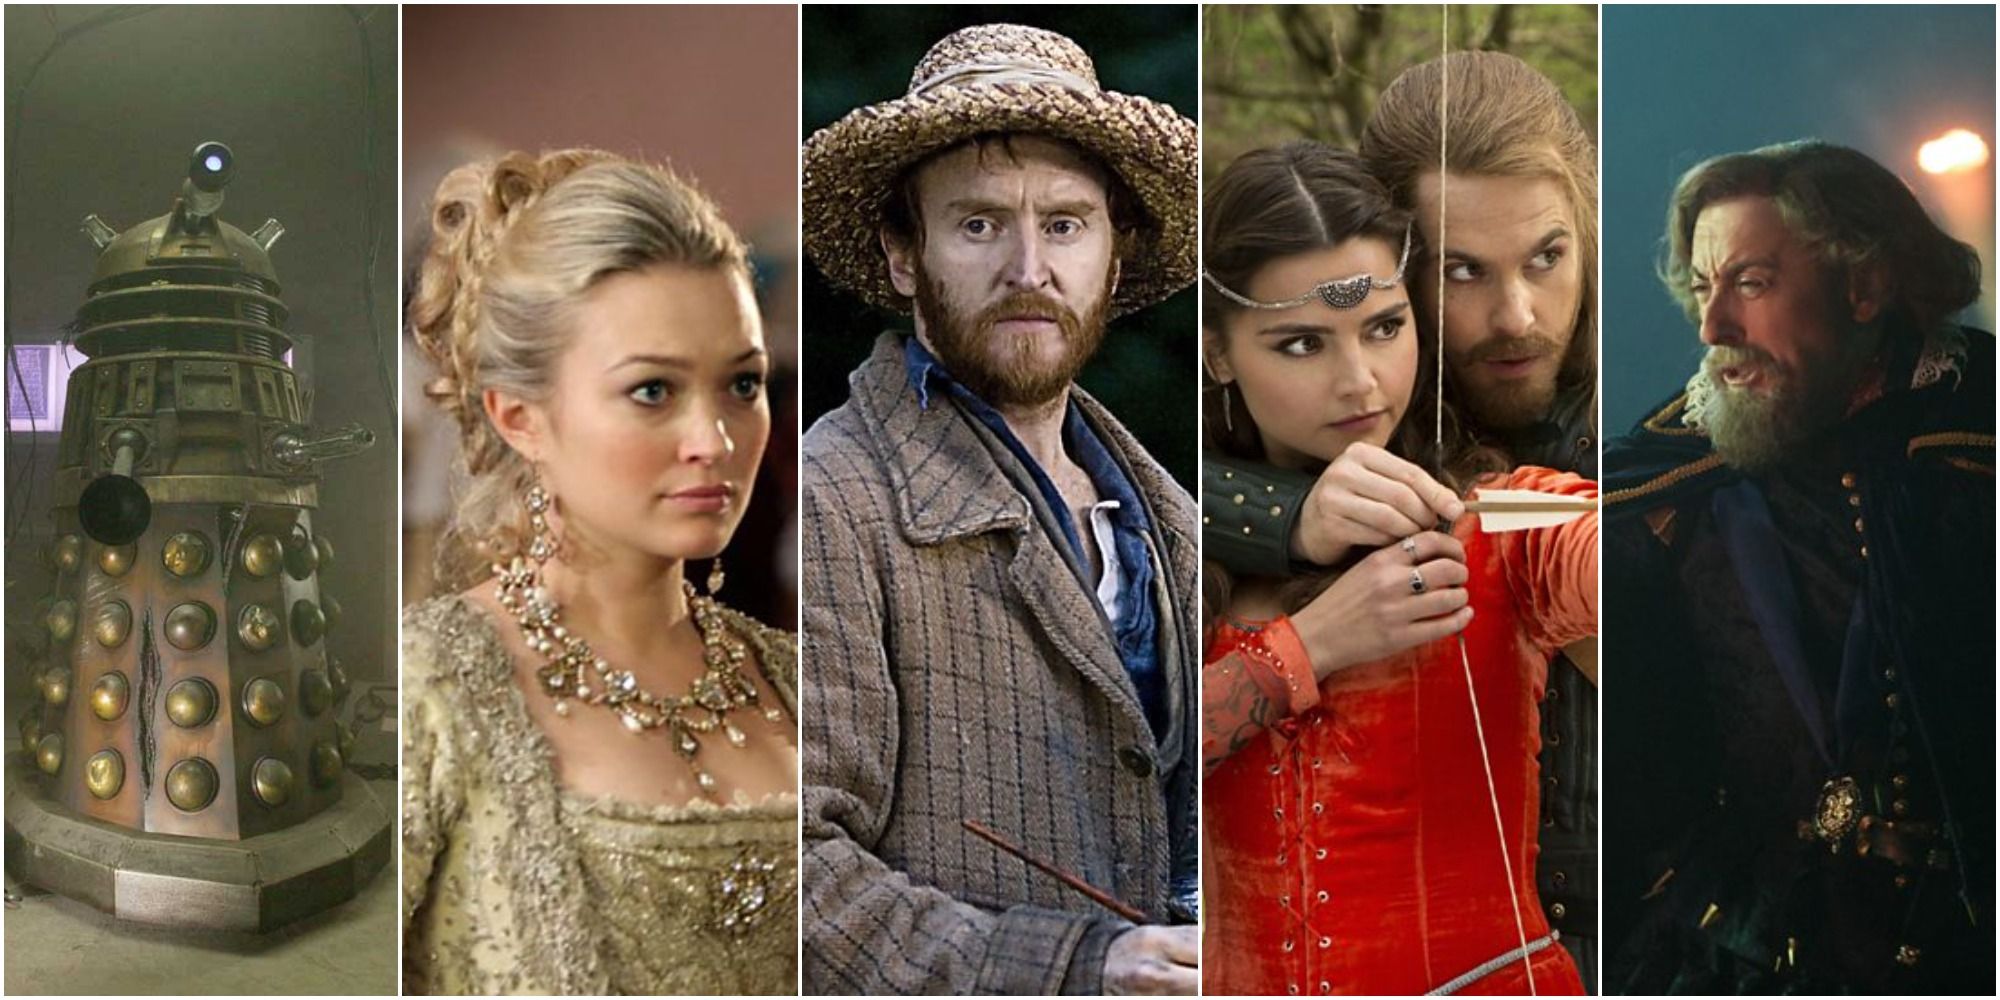 Split picture containing stills from Dalek, The Girl in the Fireplace, Vincent and the Doctor, Robot of Sherwood, and The Witchfinders